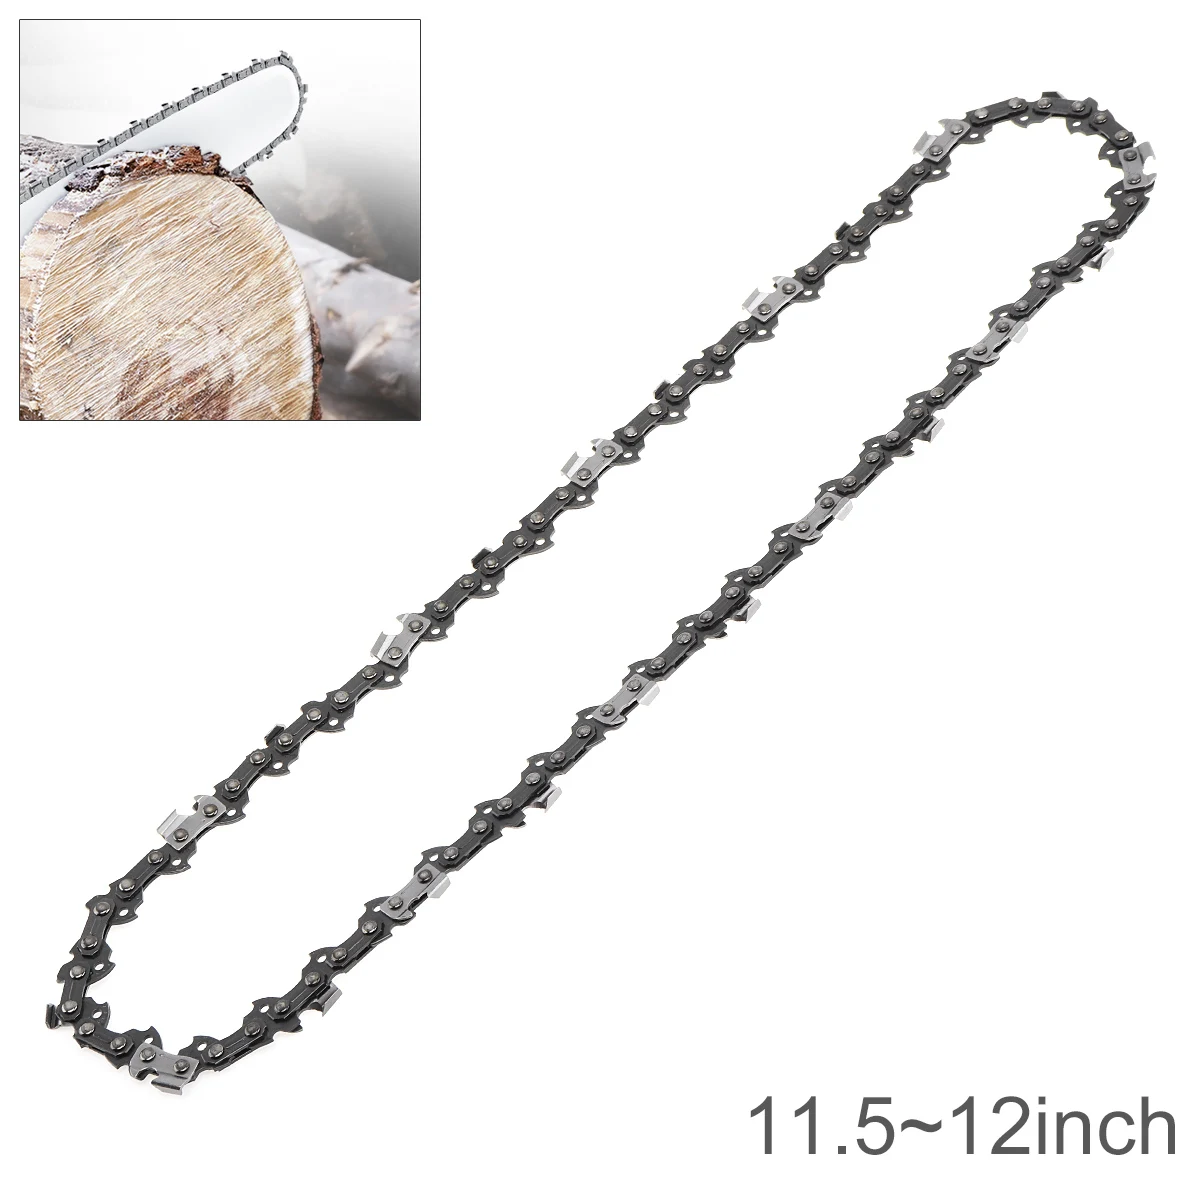 11.5-12'' Chainsaw Chain Blade Wood Cutting Chainsaw Parts 50-52 Drive 3/8 Pitch Chainsaw Saw Mill Chain Tool Accessories